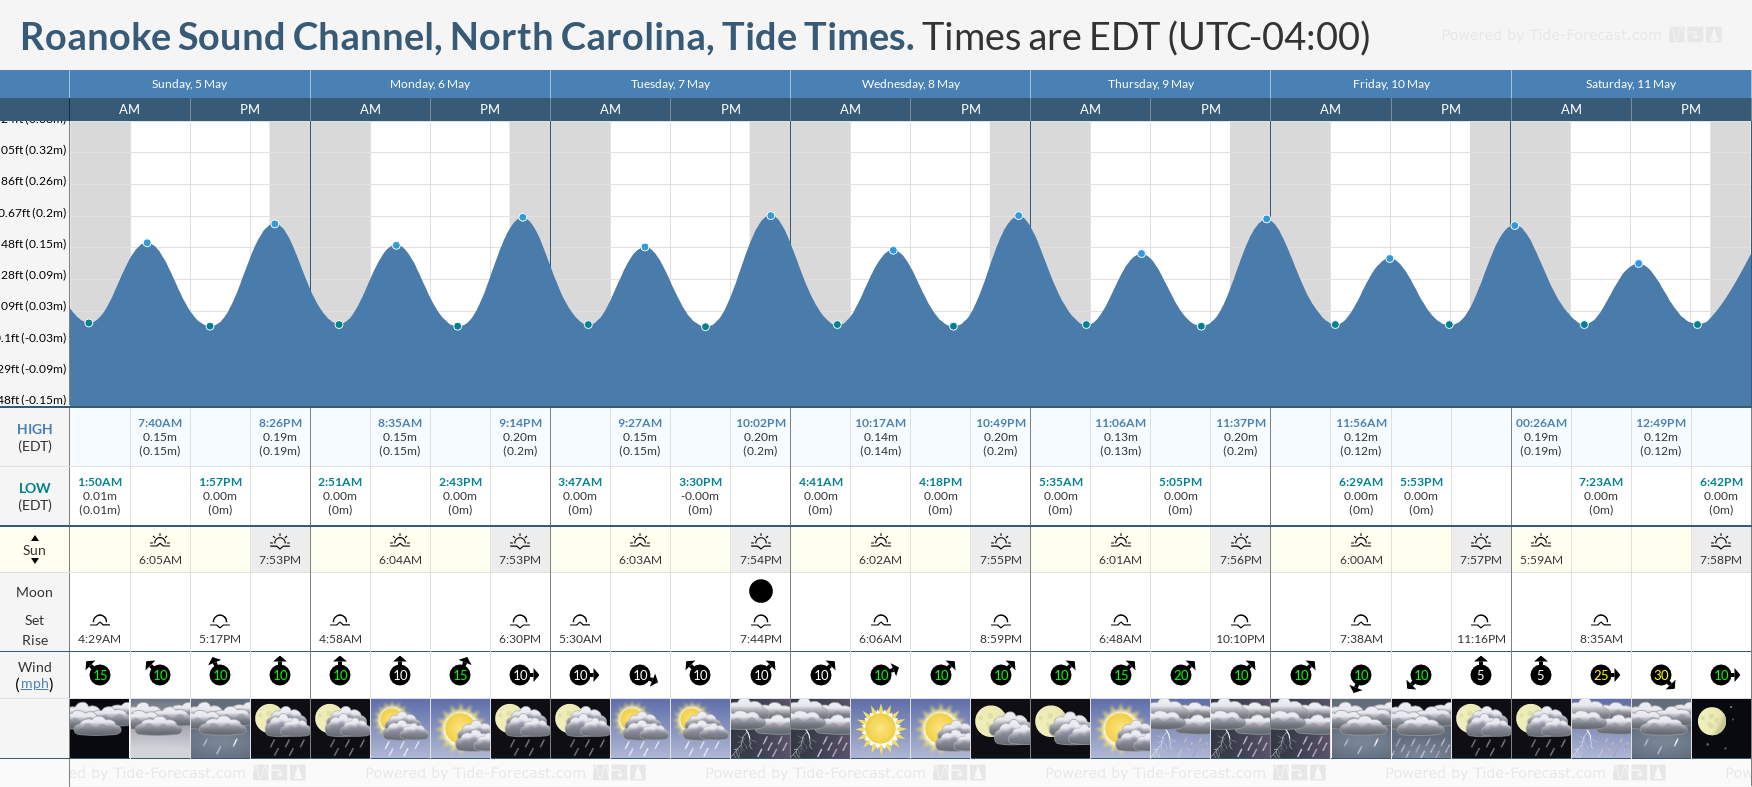 Roanoke Sound Channel, North Carolina Tide Chart including high and low tide tide times for the next 7 days